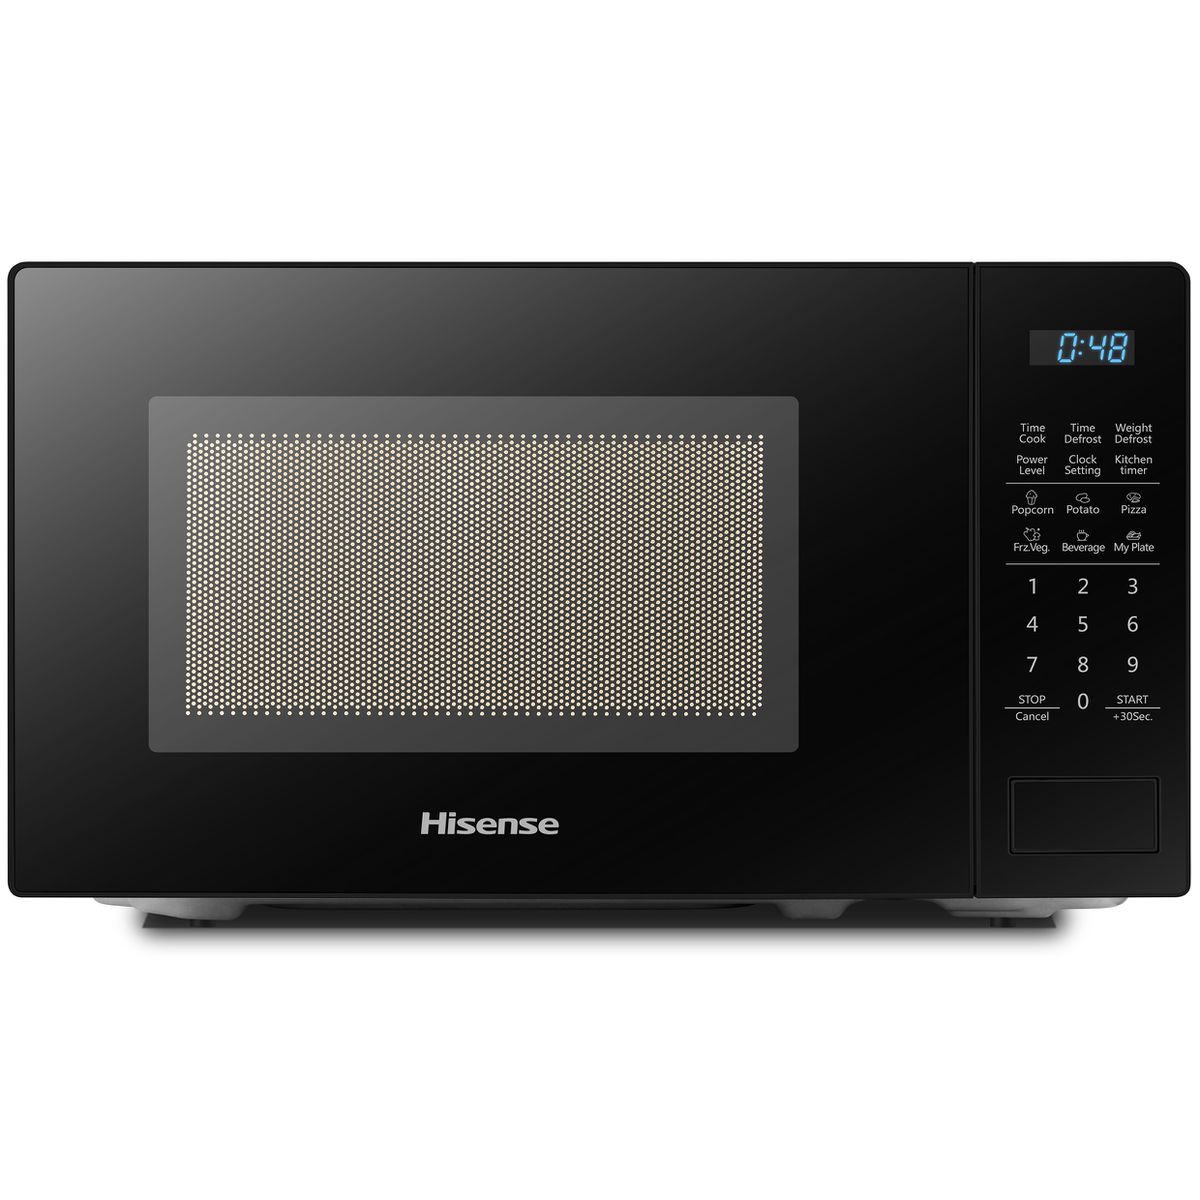 Hisense 20L Electronic Microwave Oven - Black Buy Online in Zimbabwe thedailysale.shop